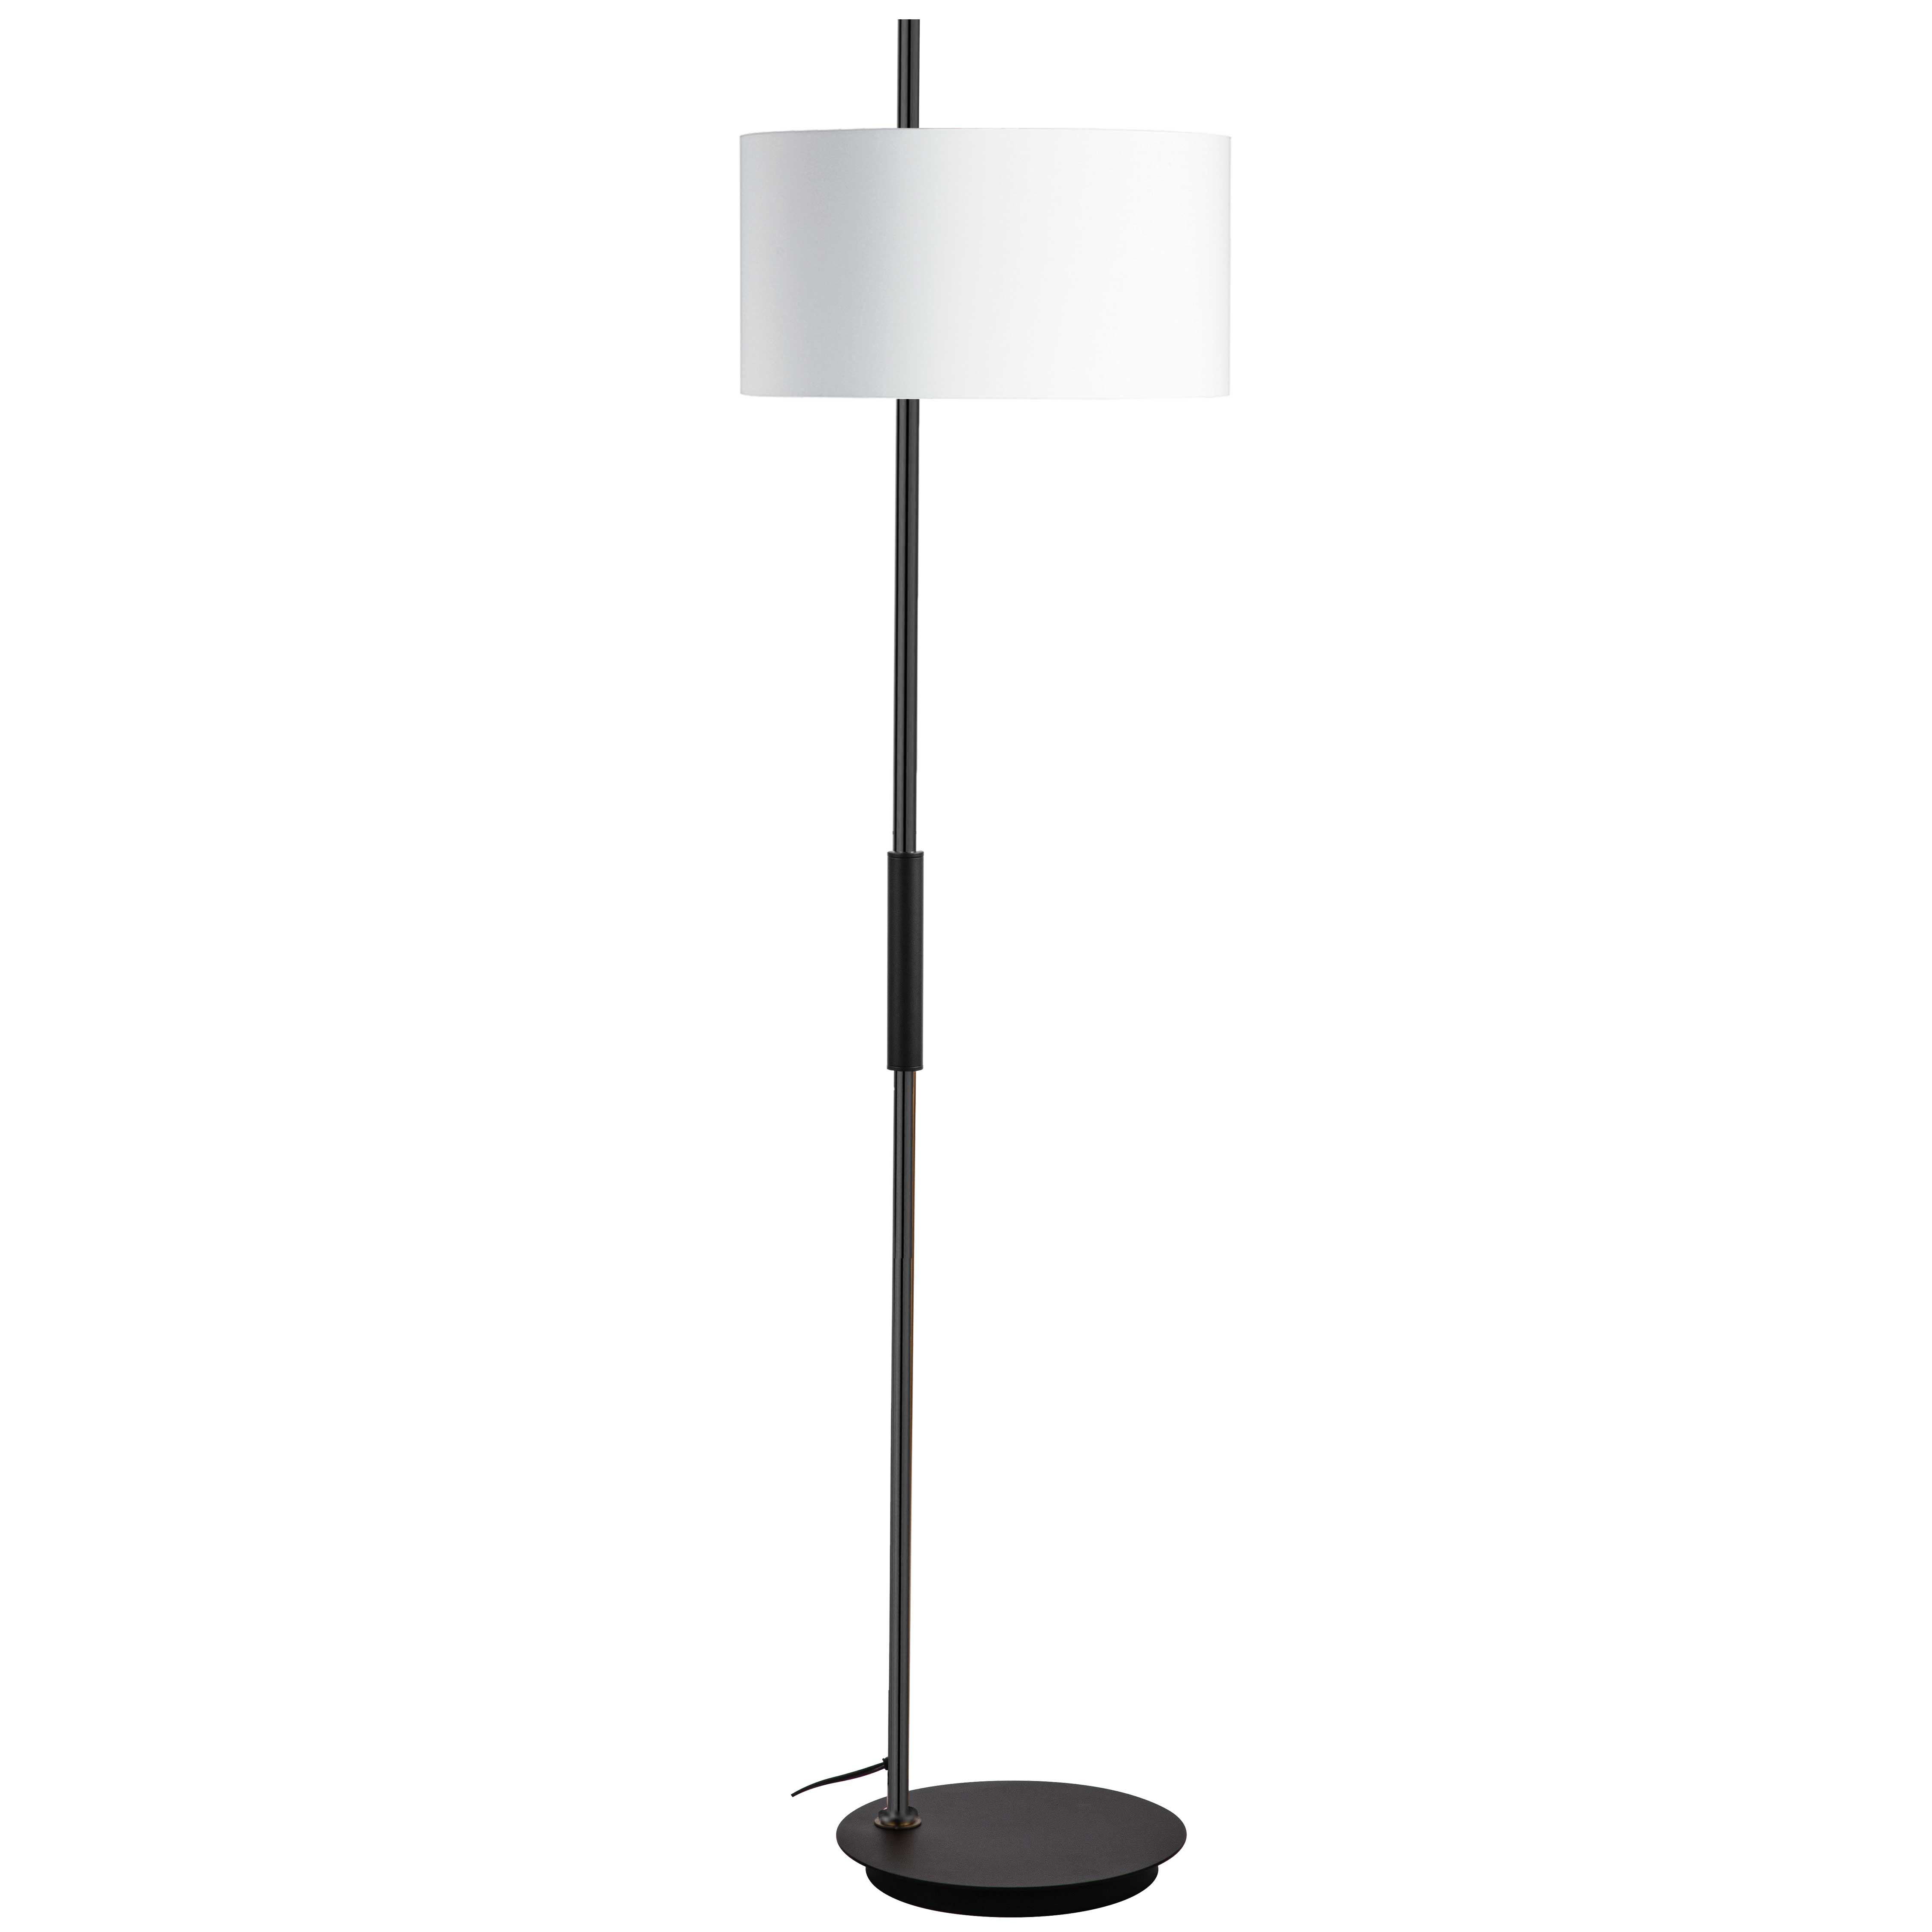 1LT Incandescent Table Lamp, MB w/ WH Shade